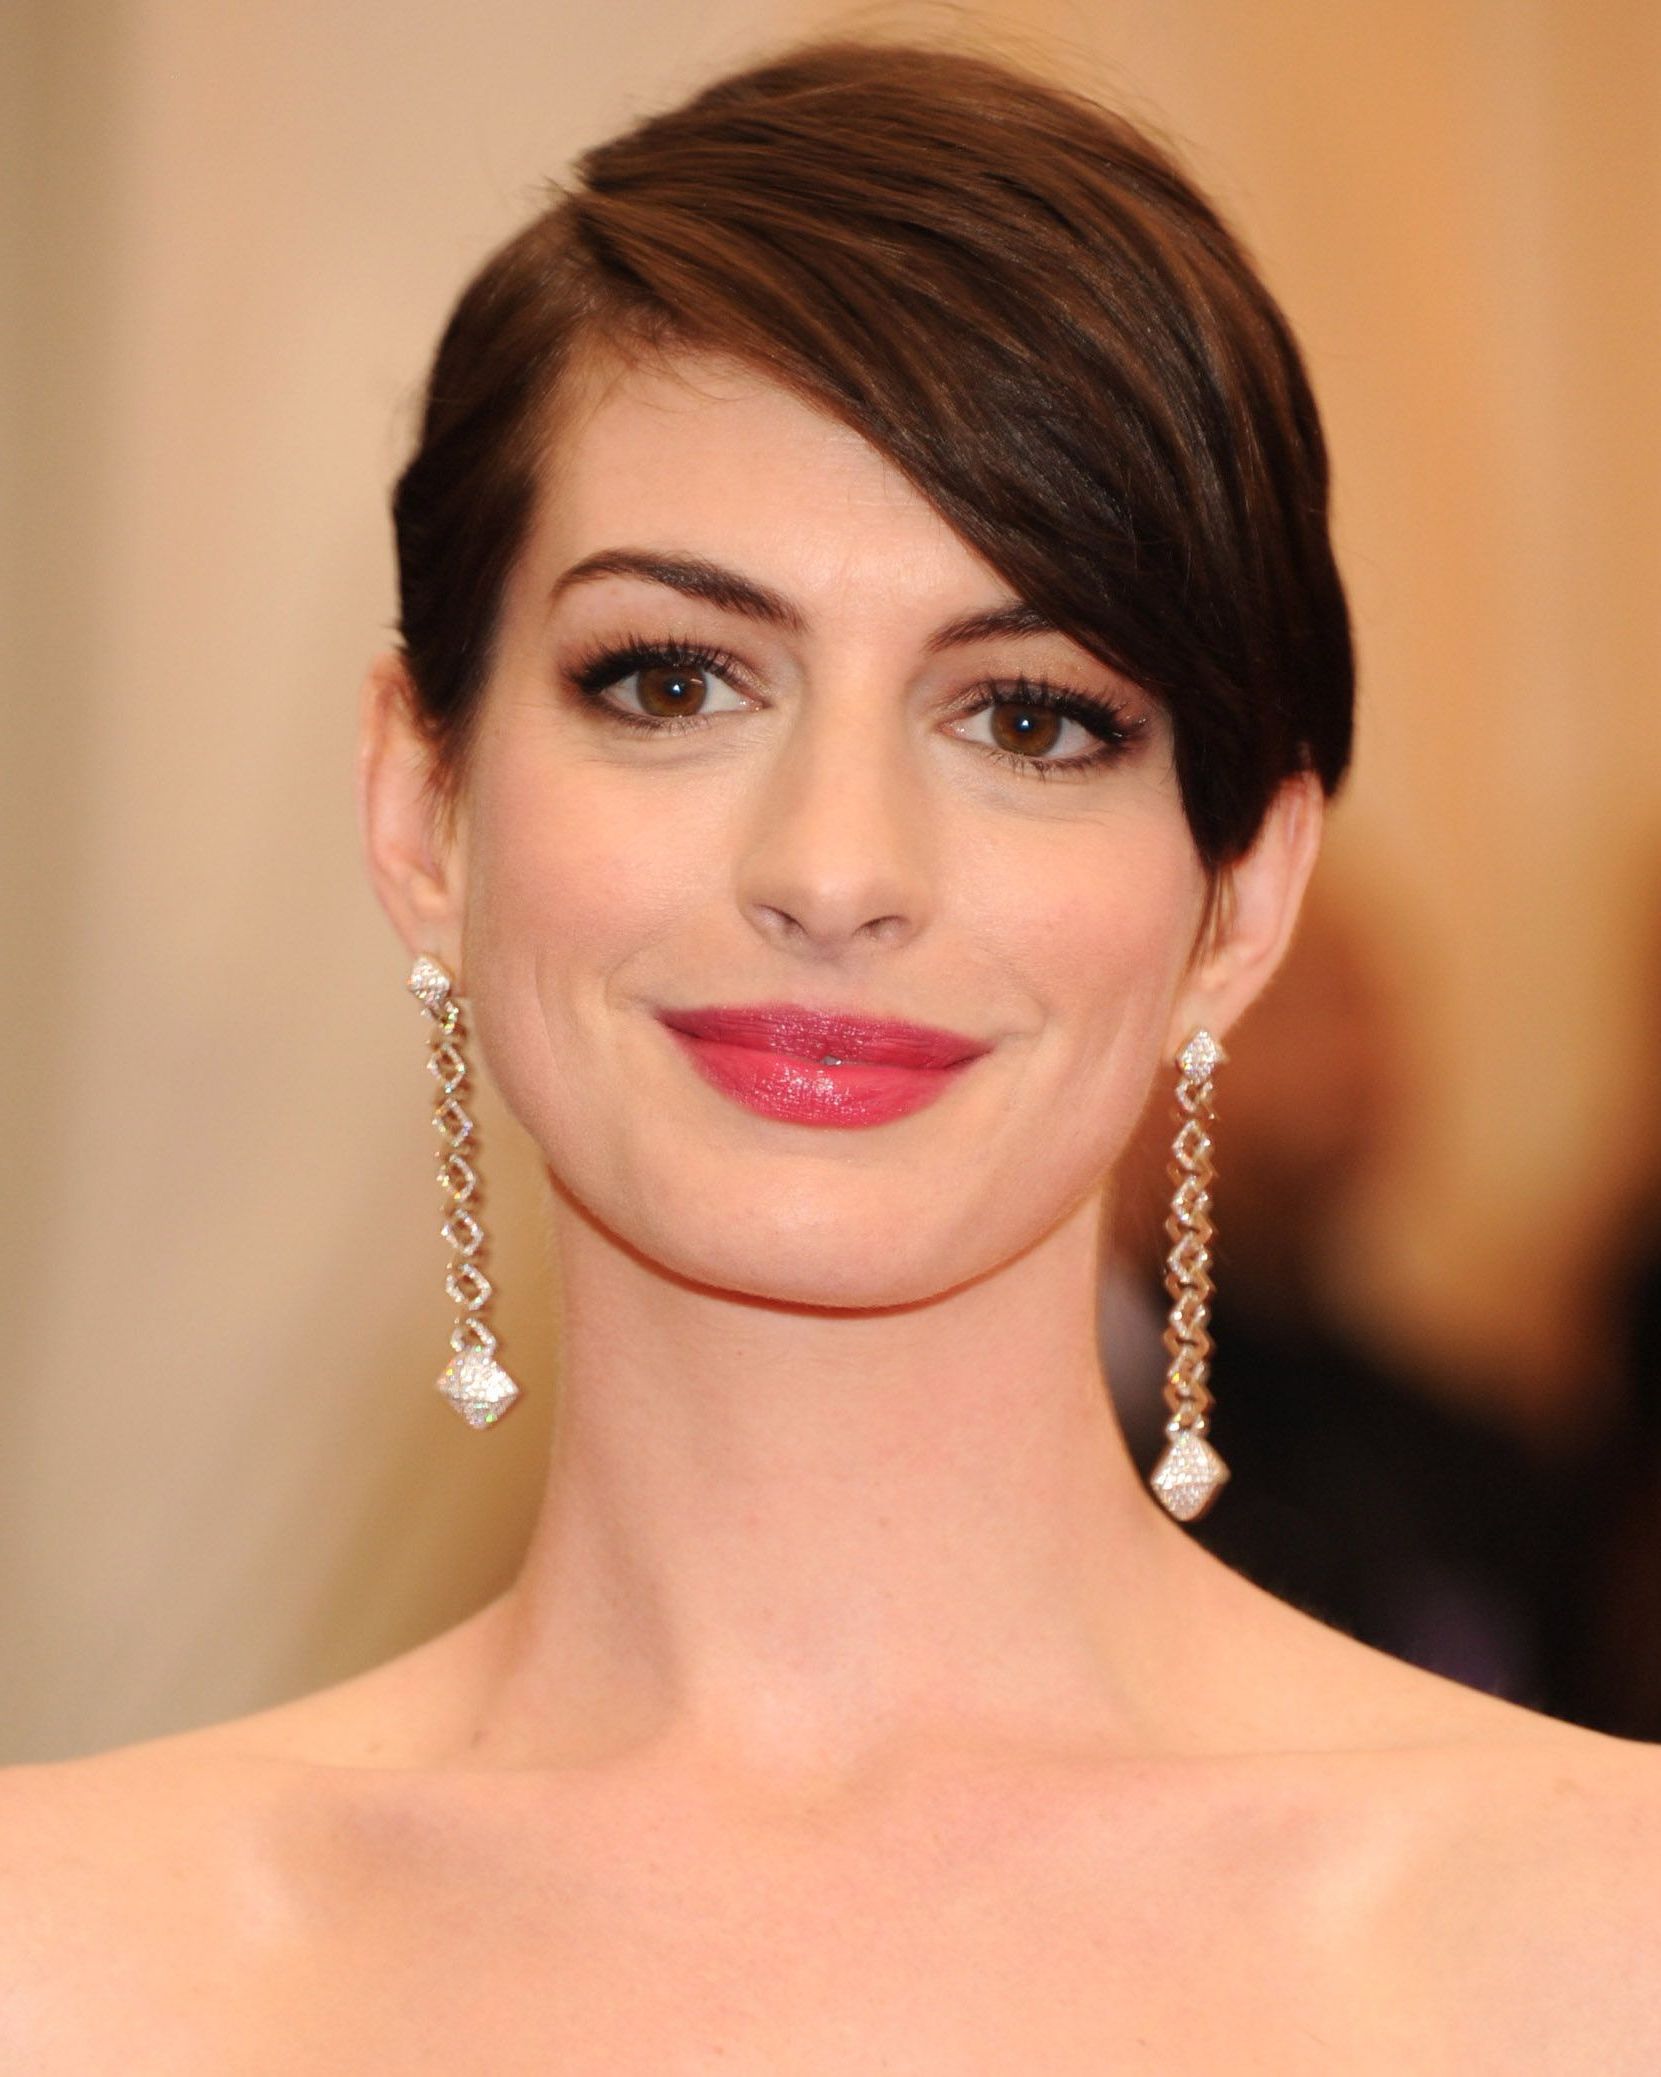 32 Best Short Hair Styles – Bobs, Pixie Cuts, And More Celebrity Throughout Dinner Short Hairstyles (Photo 22 of 25)